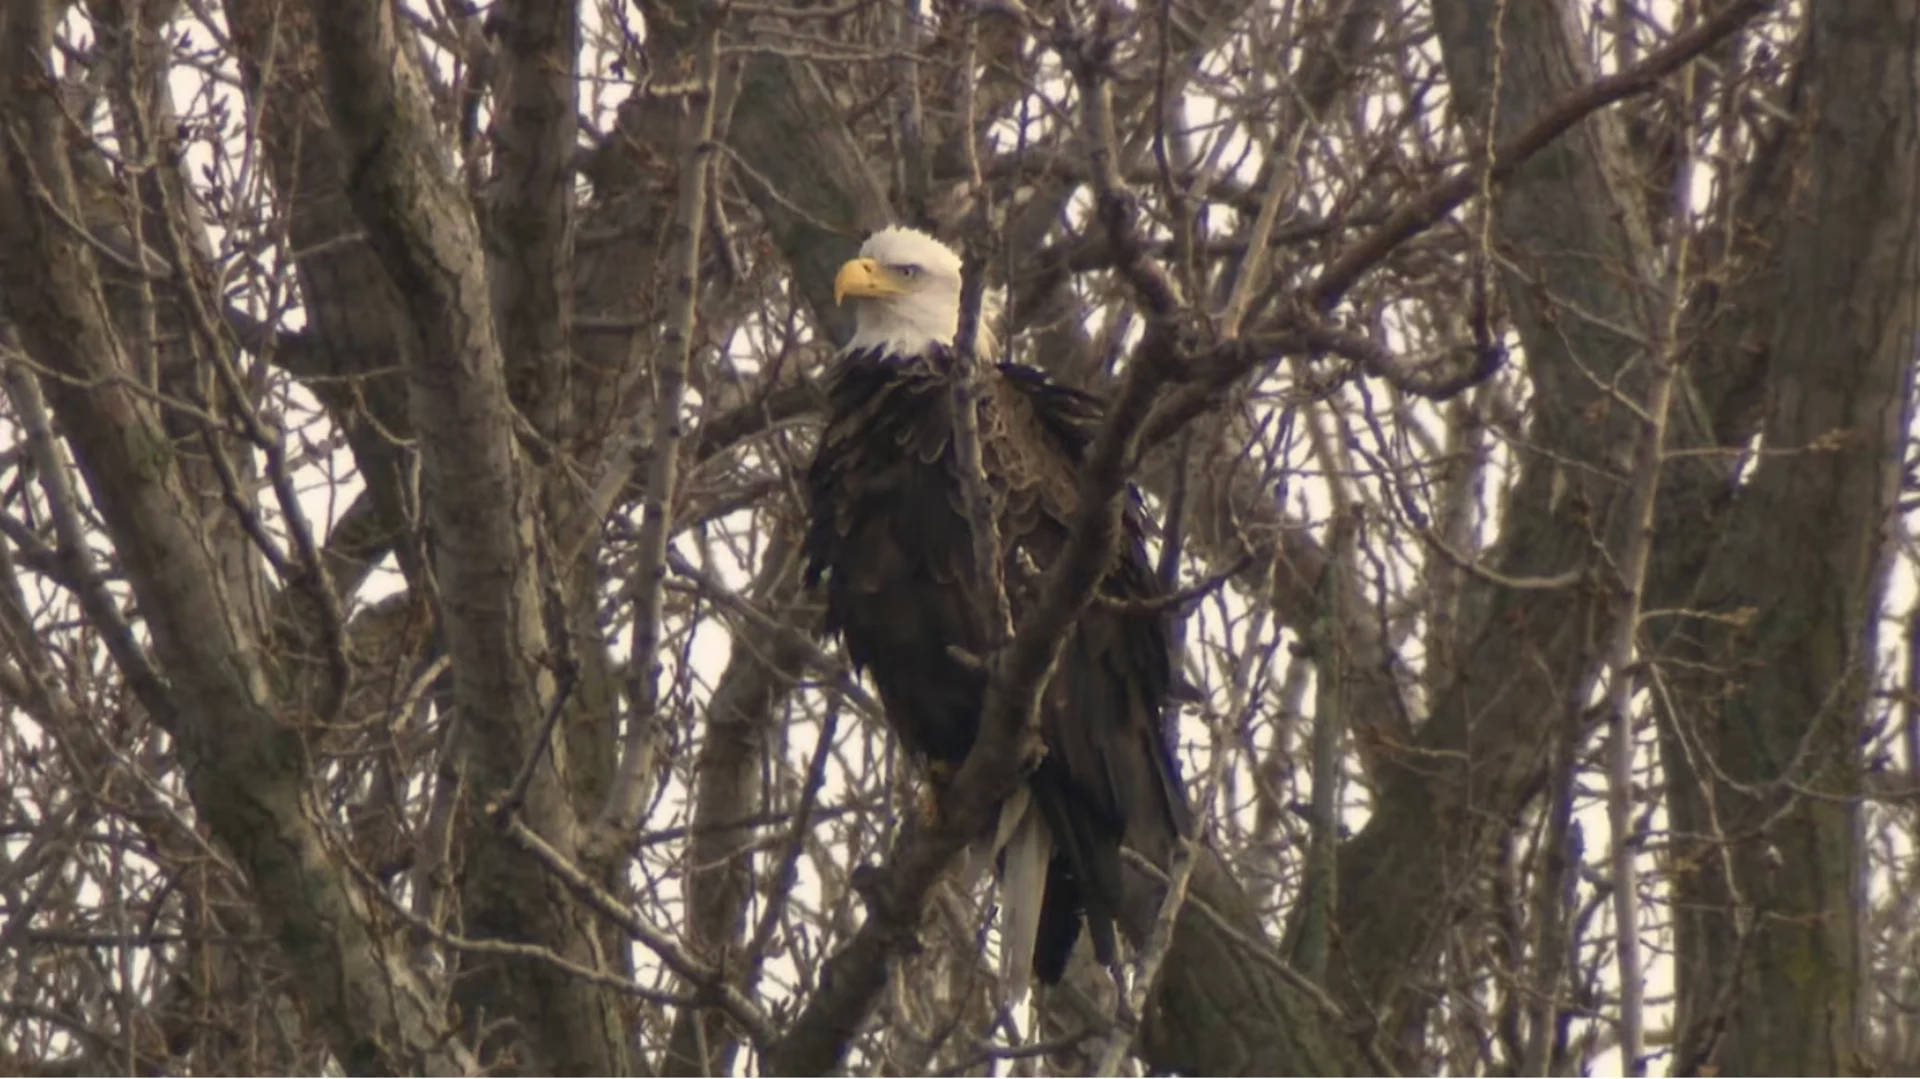 Bald eagle nest found in Toronto for the 1st time ever